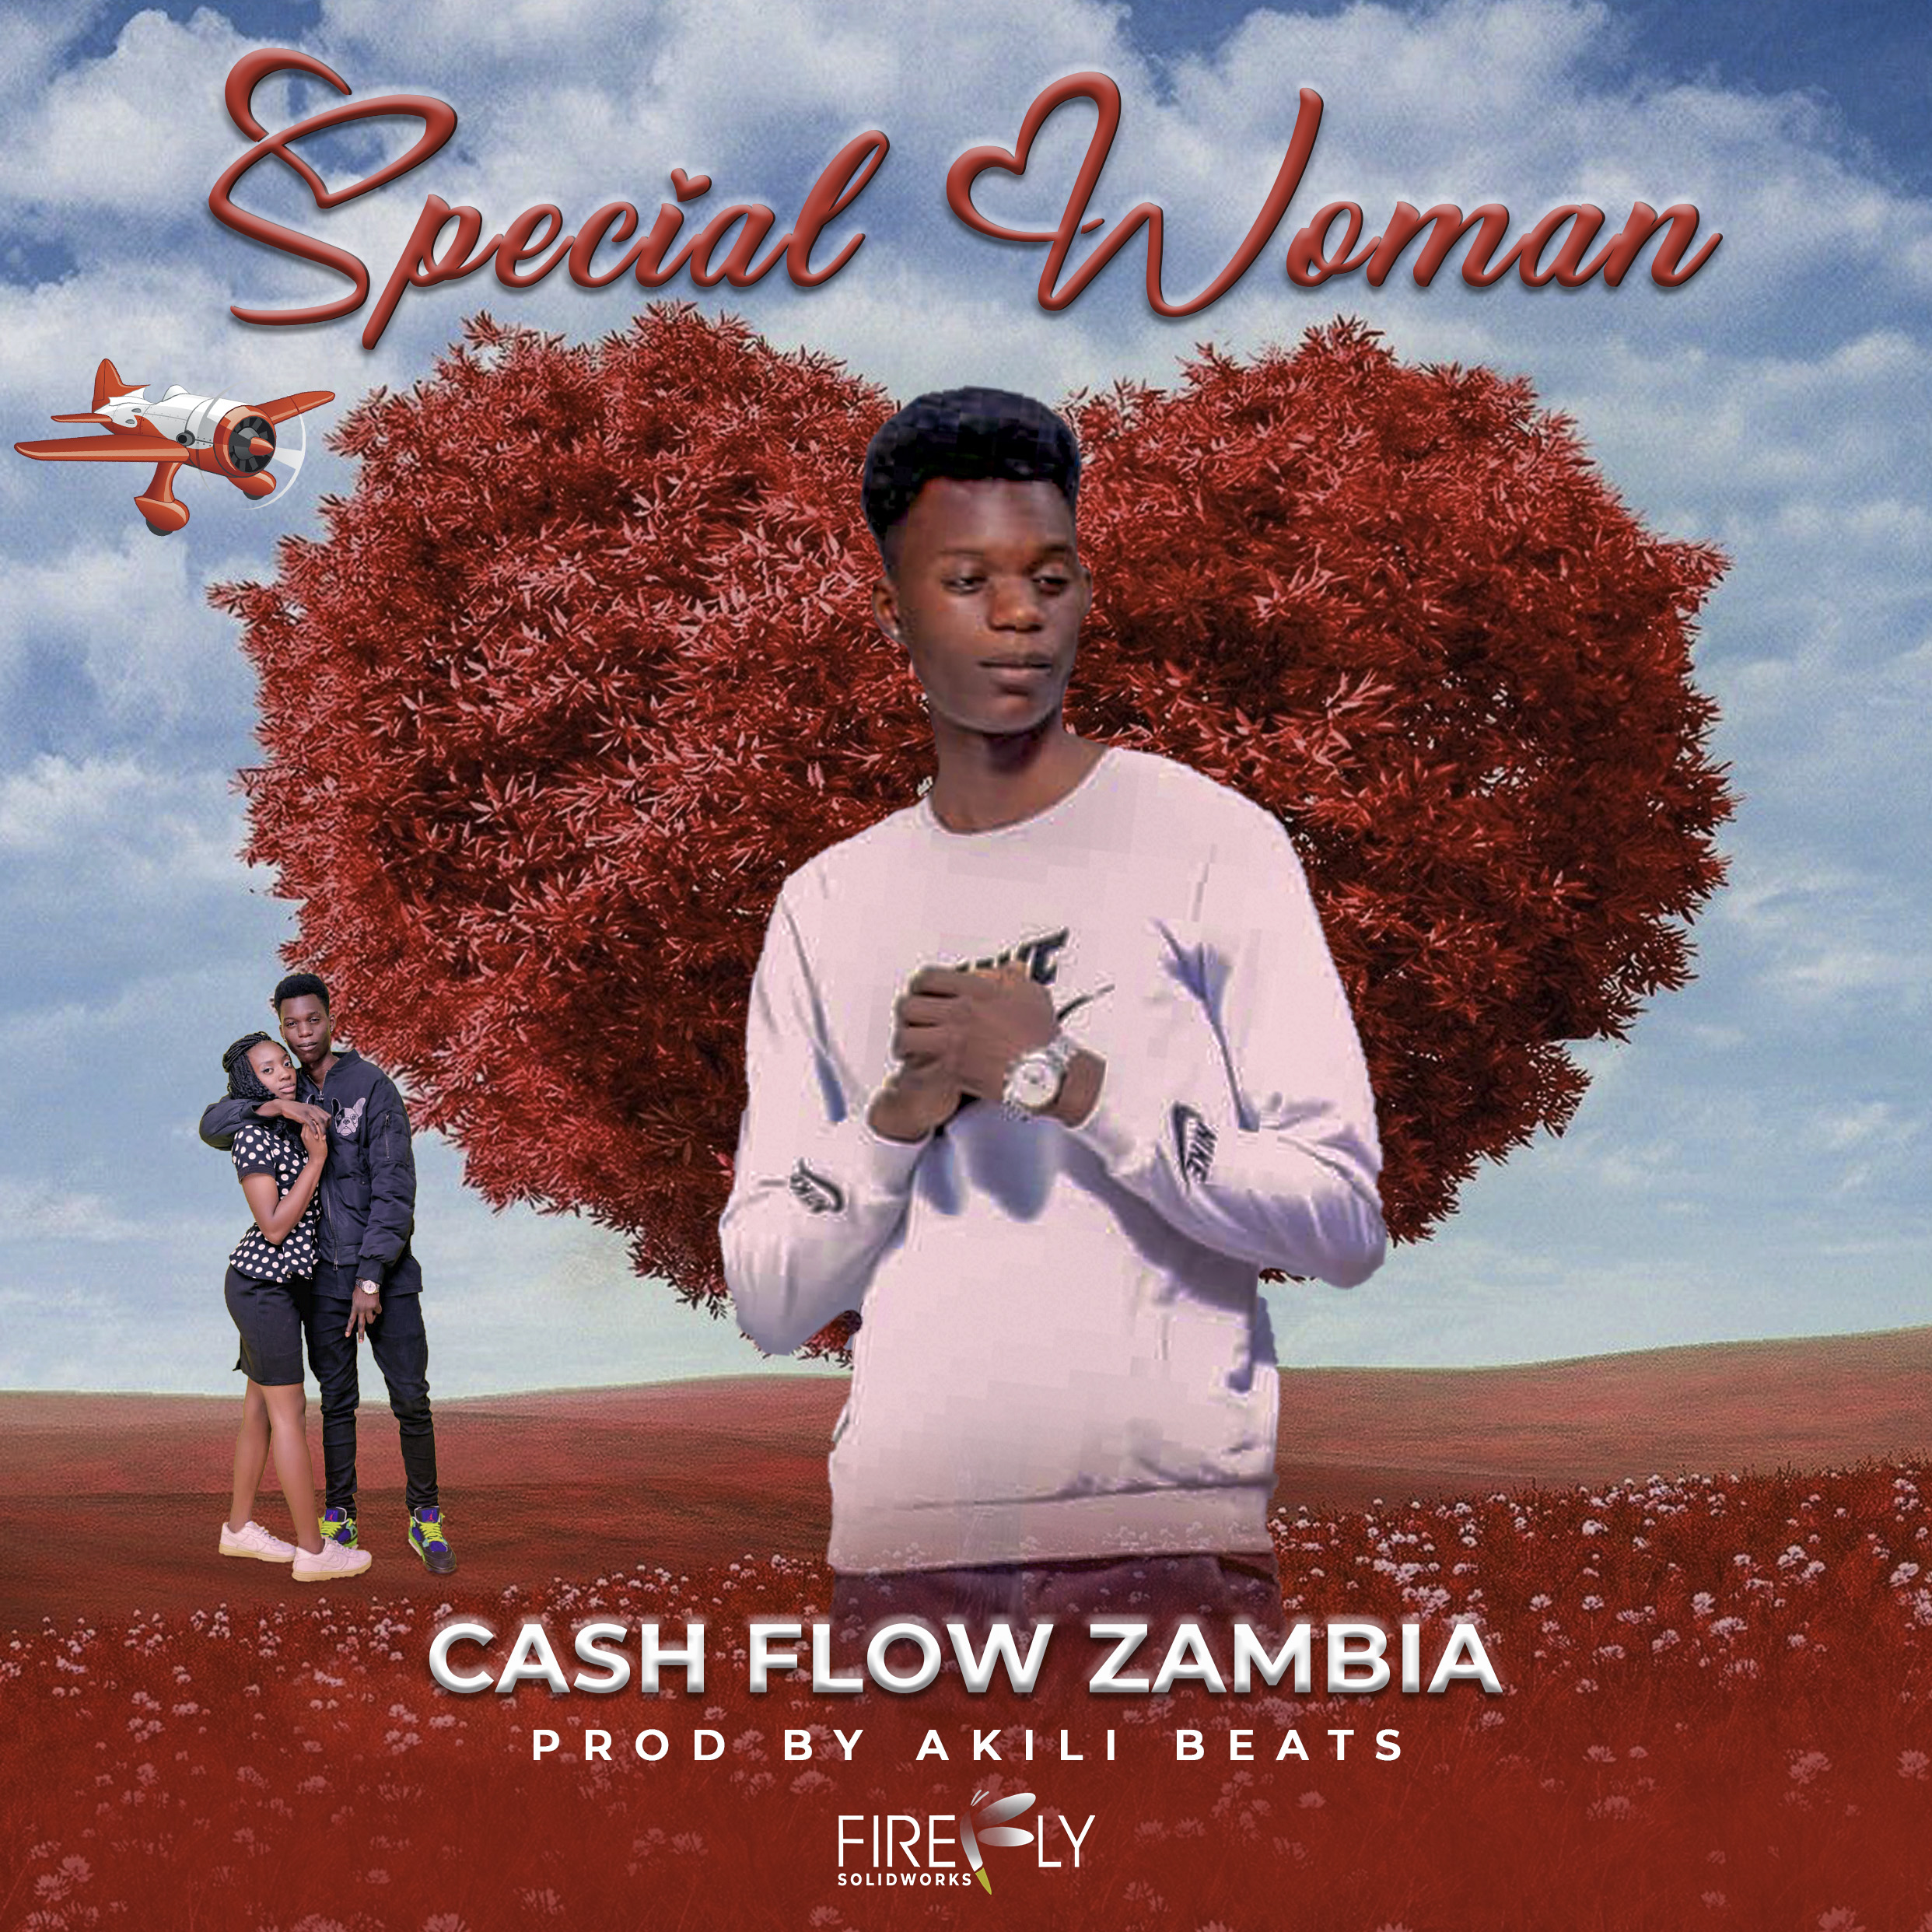 Cash Flow Zambia - Special Woman Mp3 Download